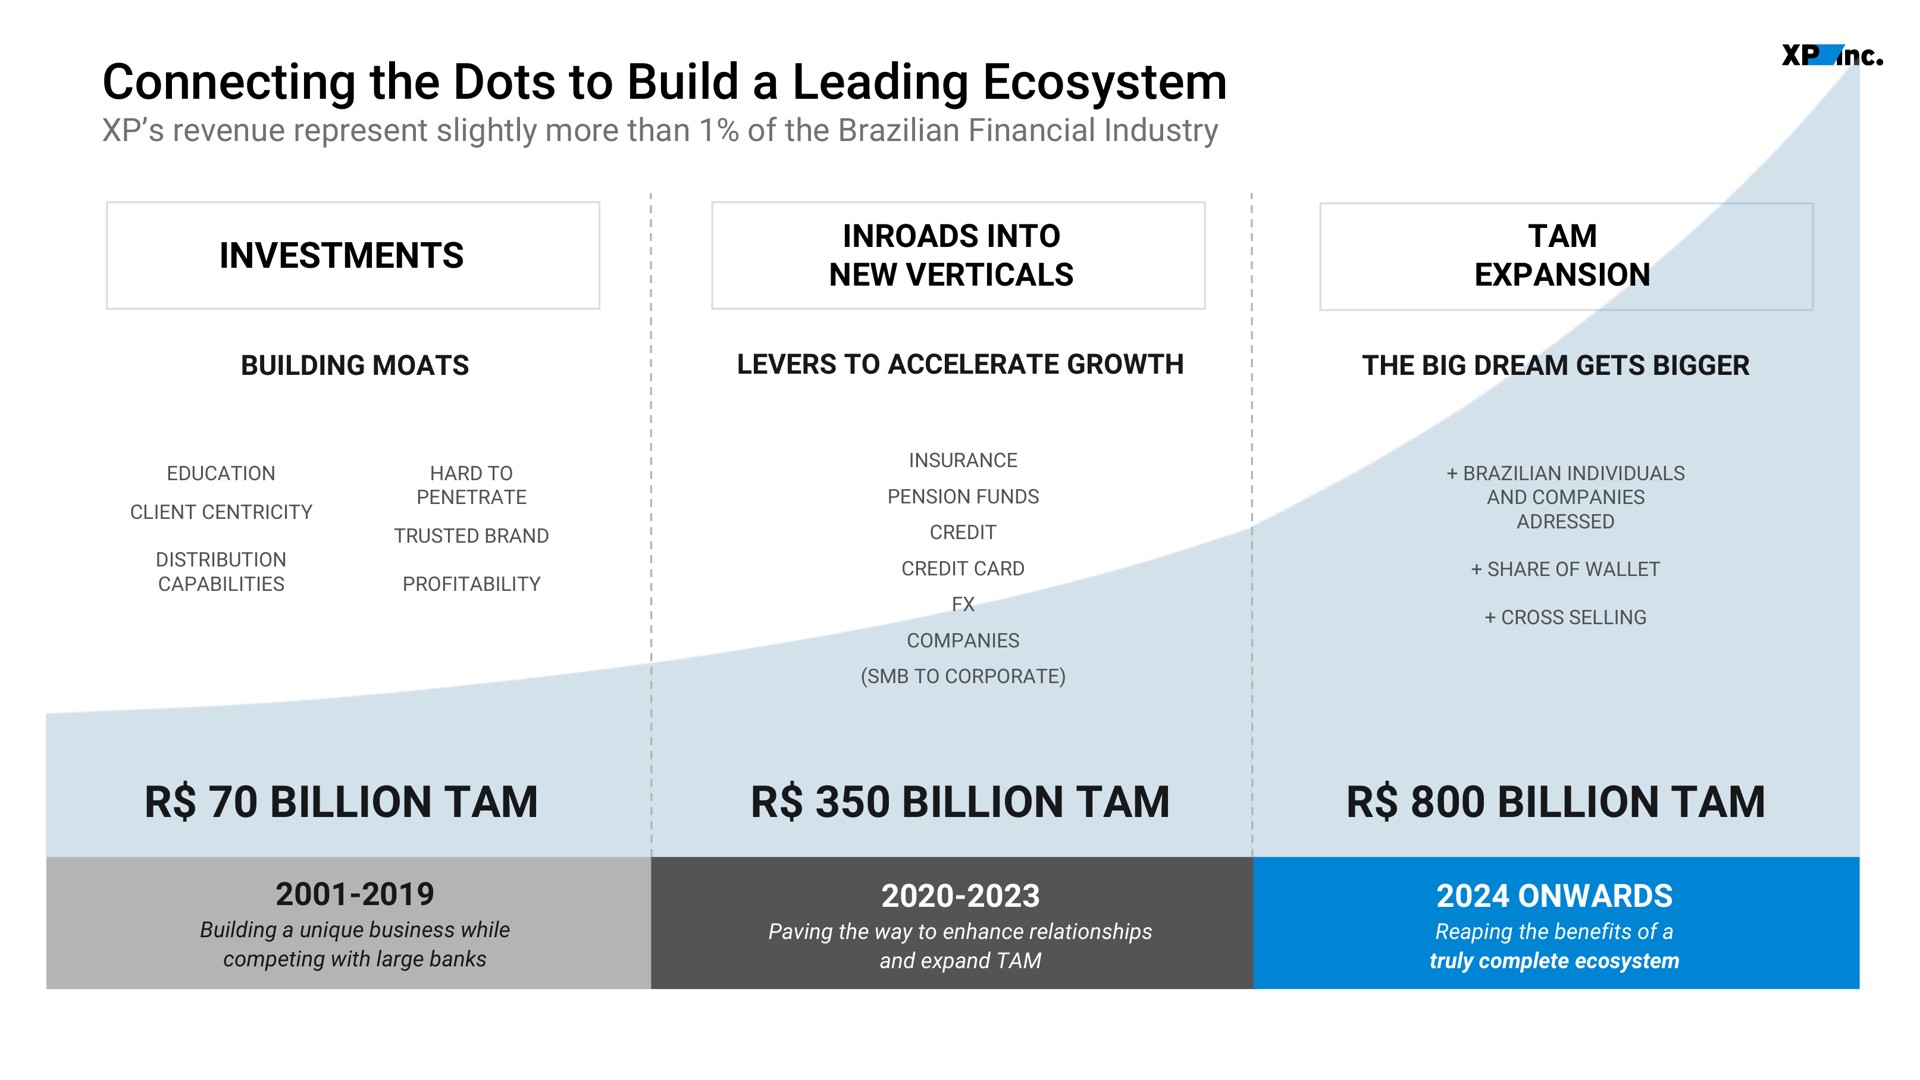 connecting the dots to build a leading ecosystem investments billion tam billion tam billion tam building moats | XP Inc